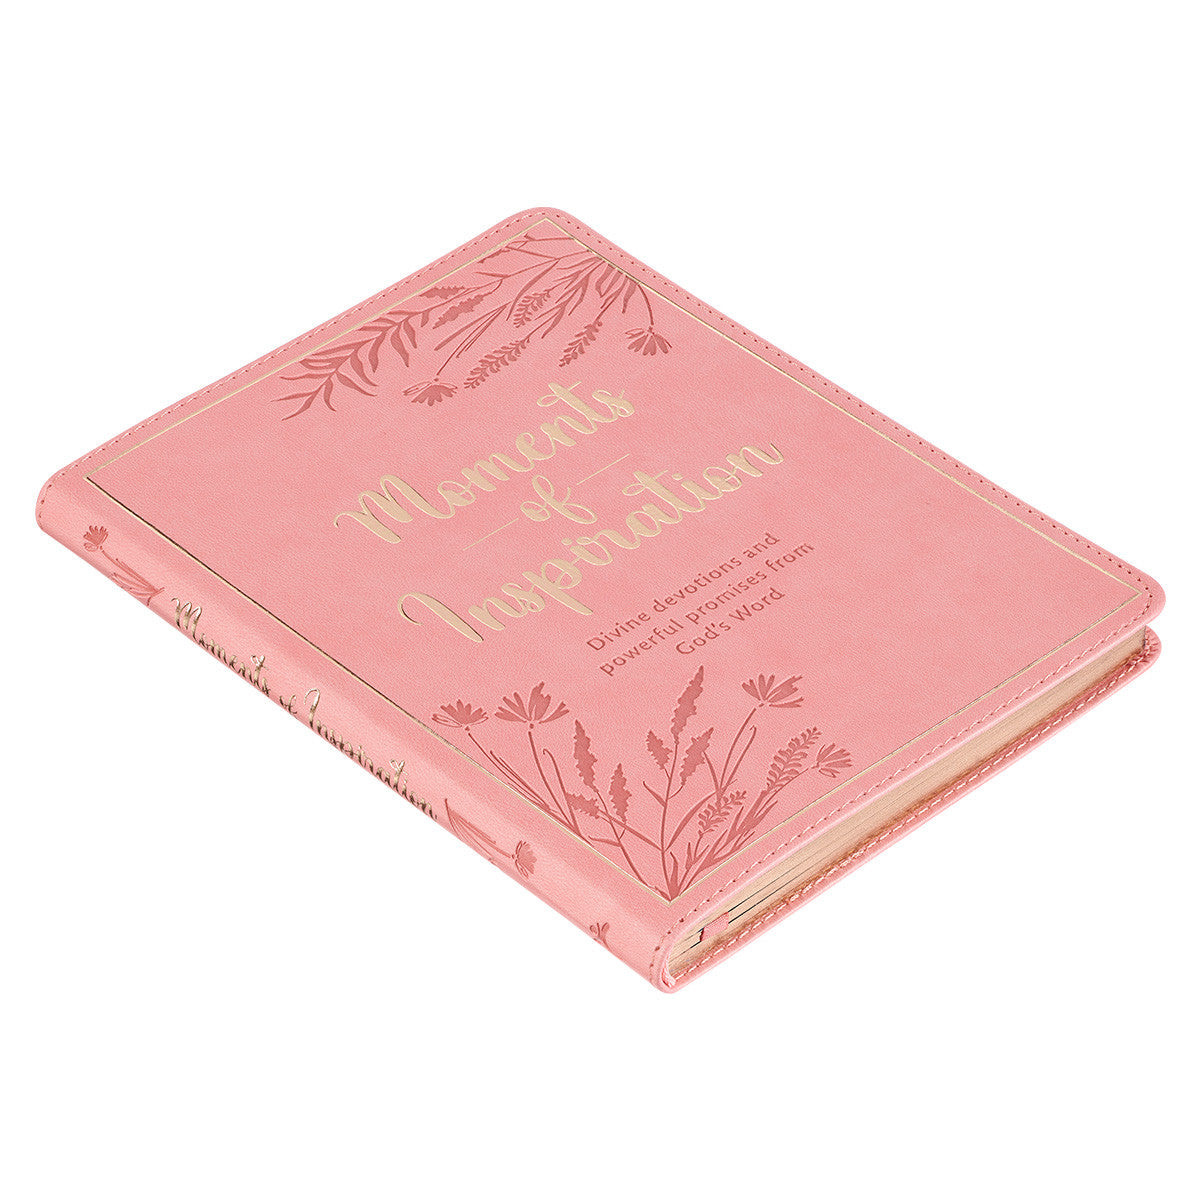 Moments of Inspiration Pink Faux Leather Gift Book